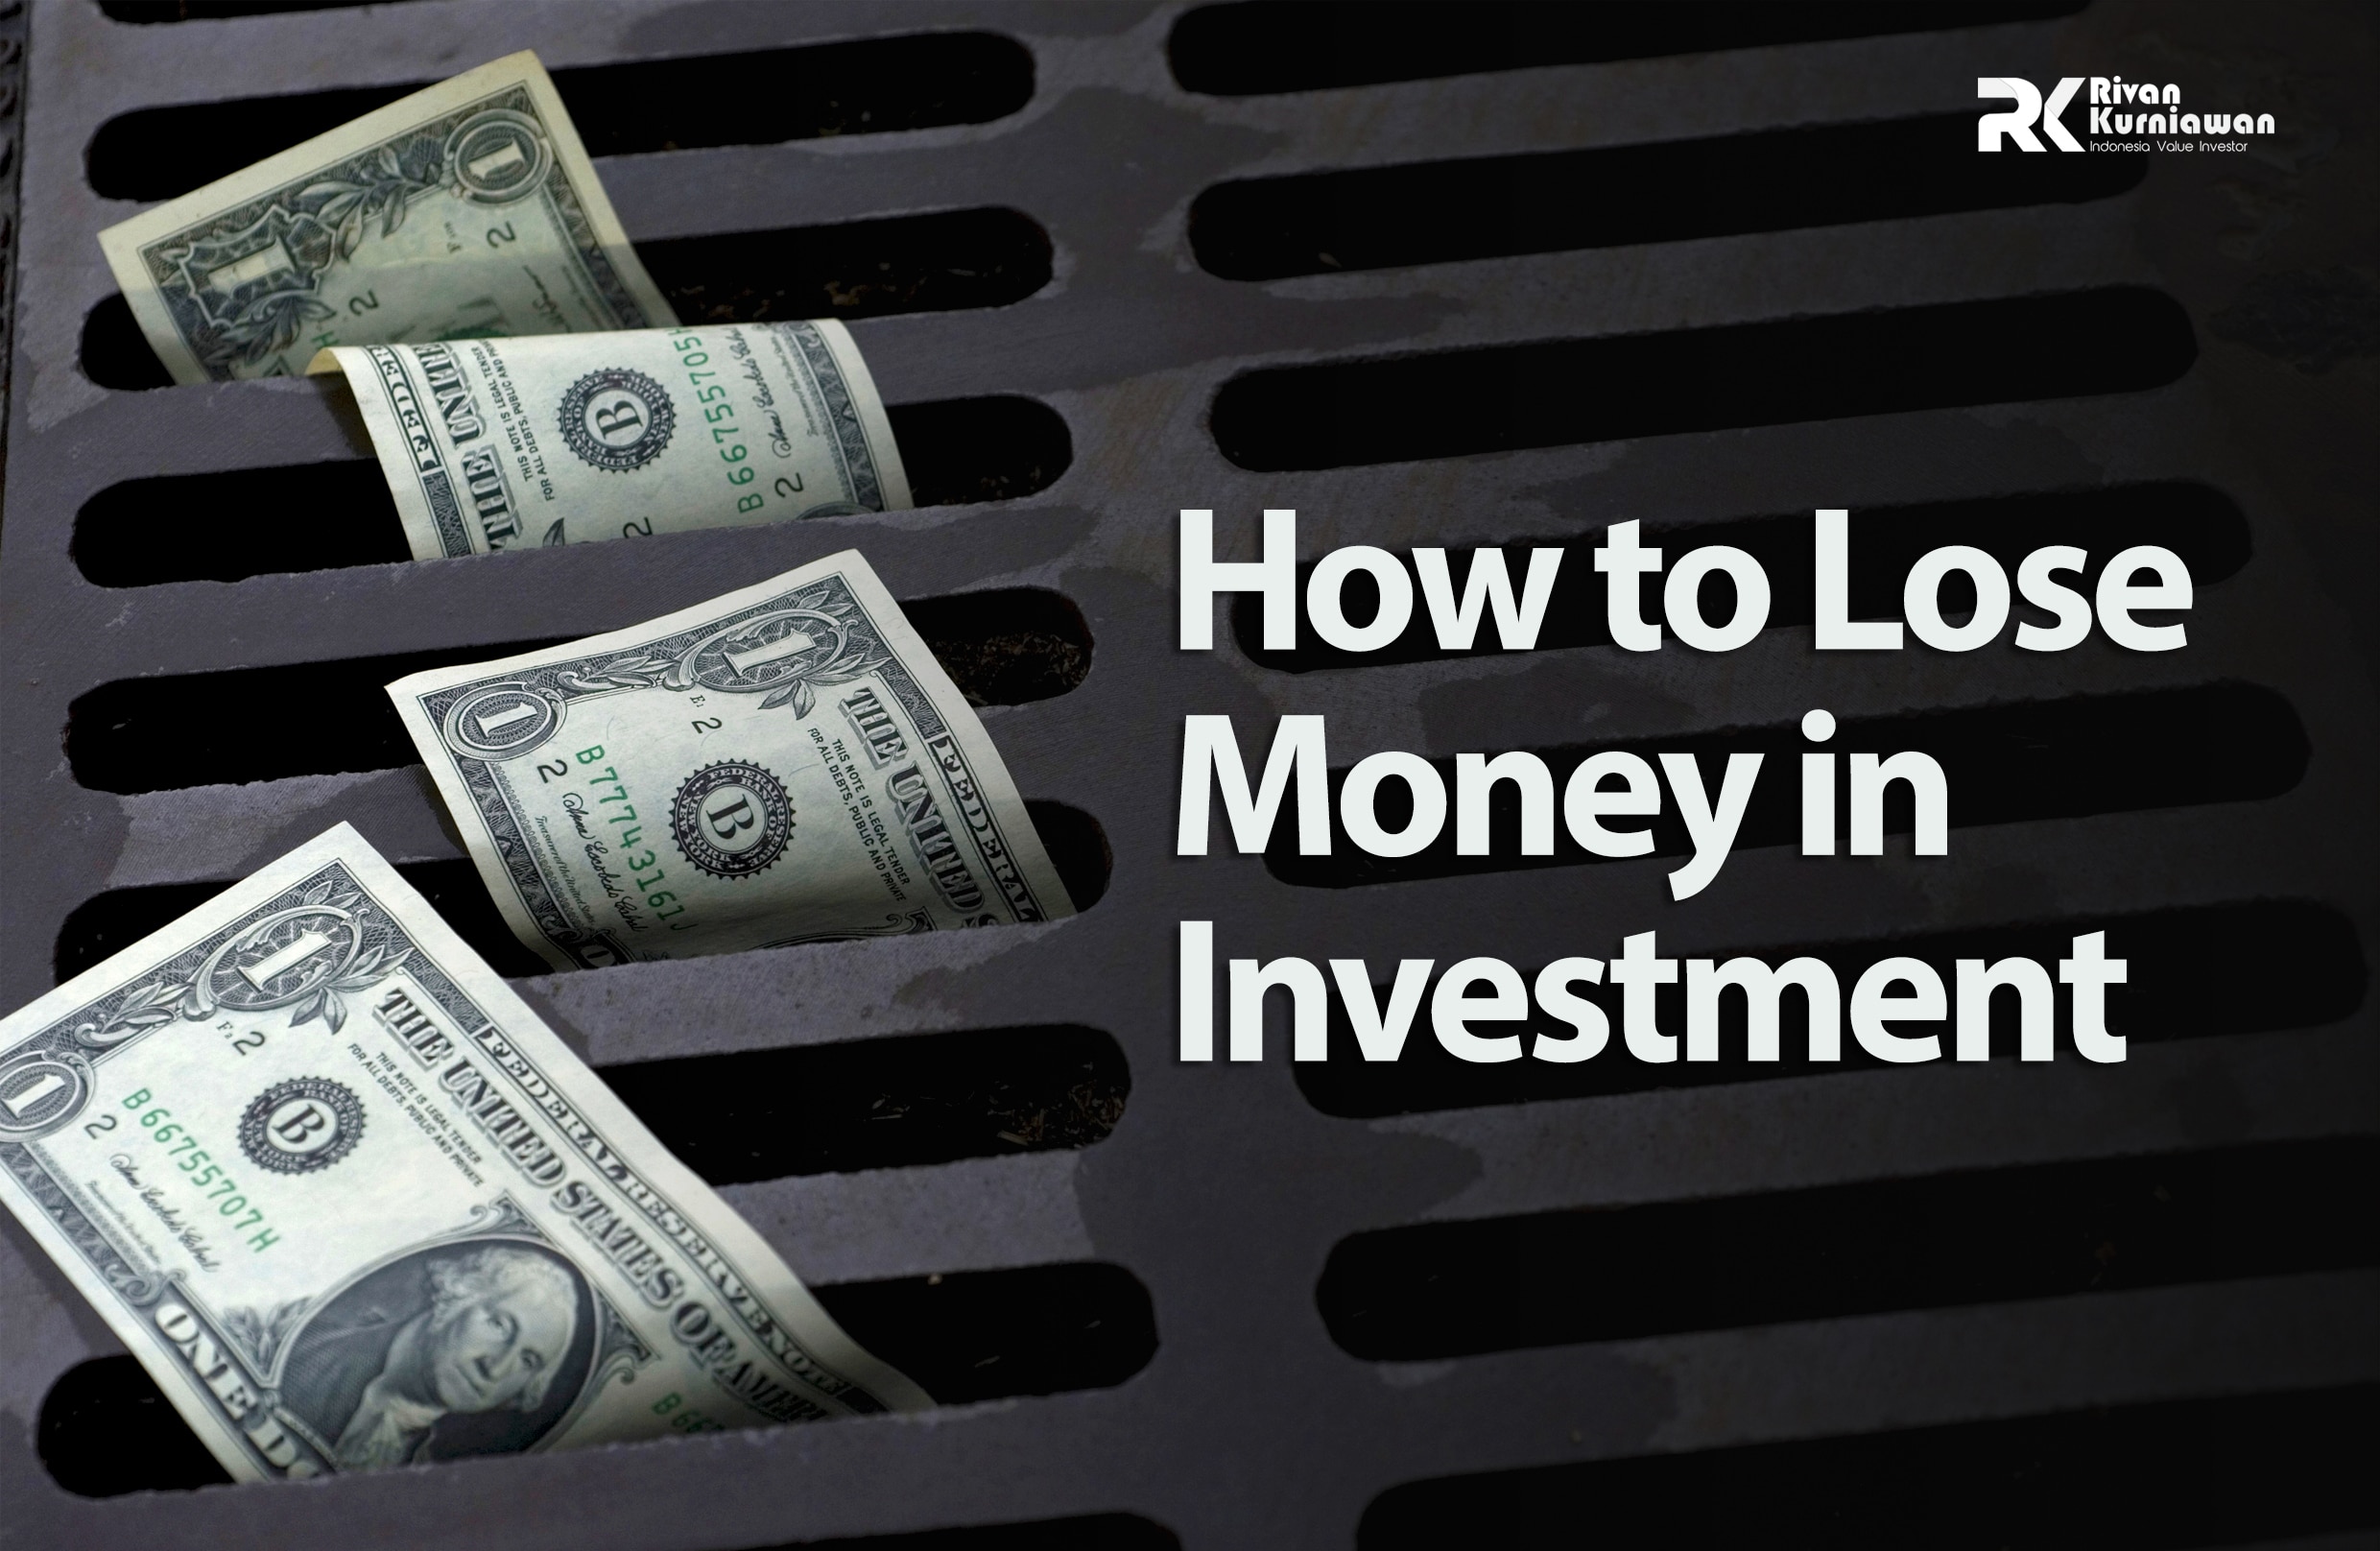 Lose Money in Investment